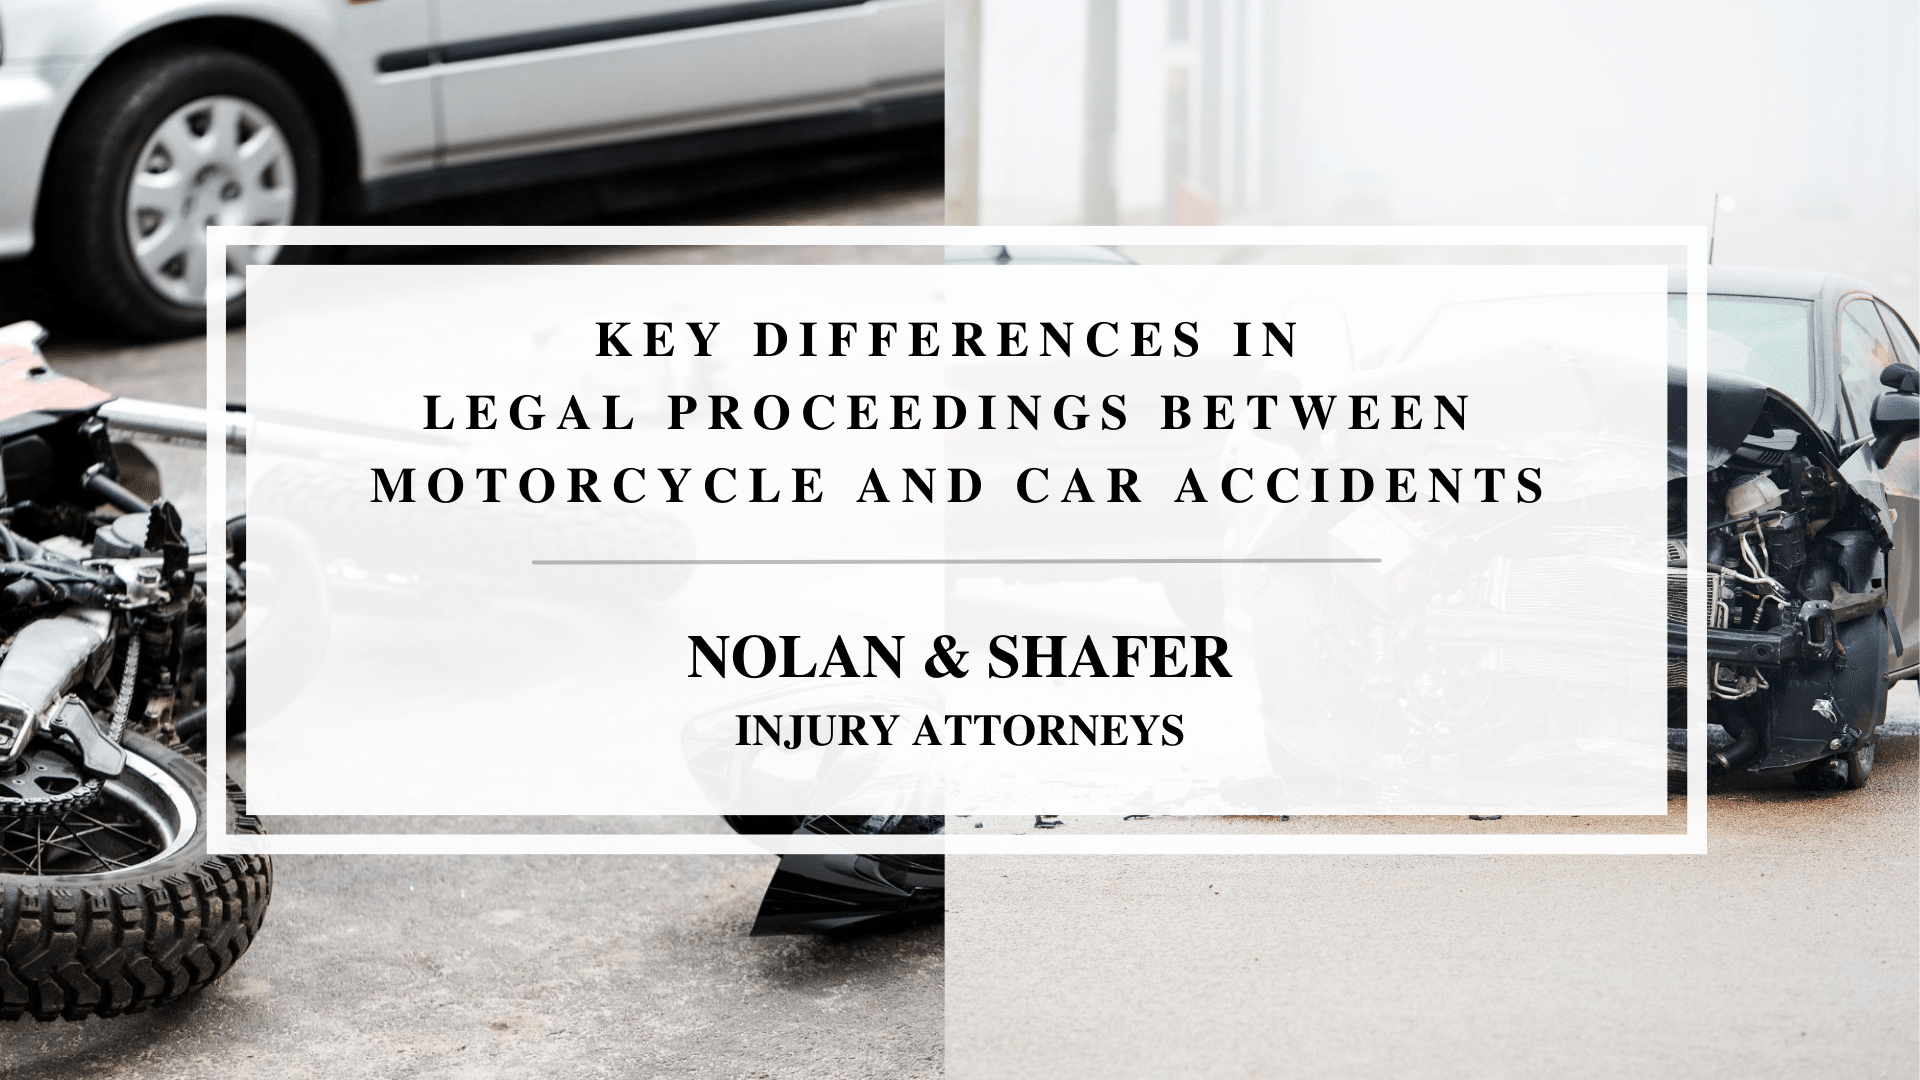 Featured image of key differences in legal proceeding between motorcycle and car accidents